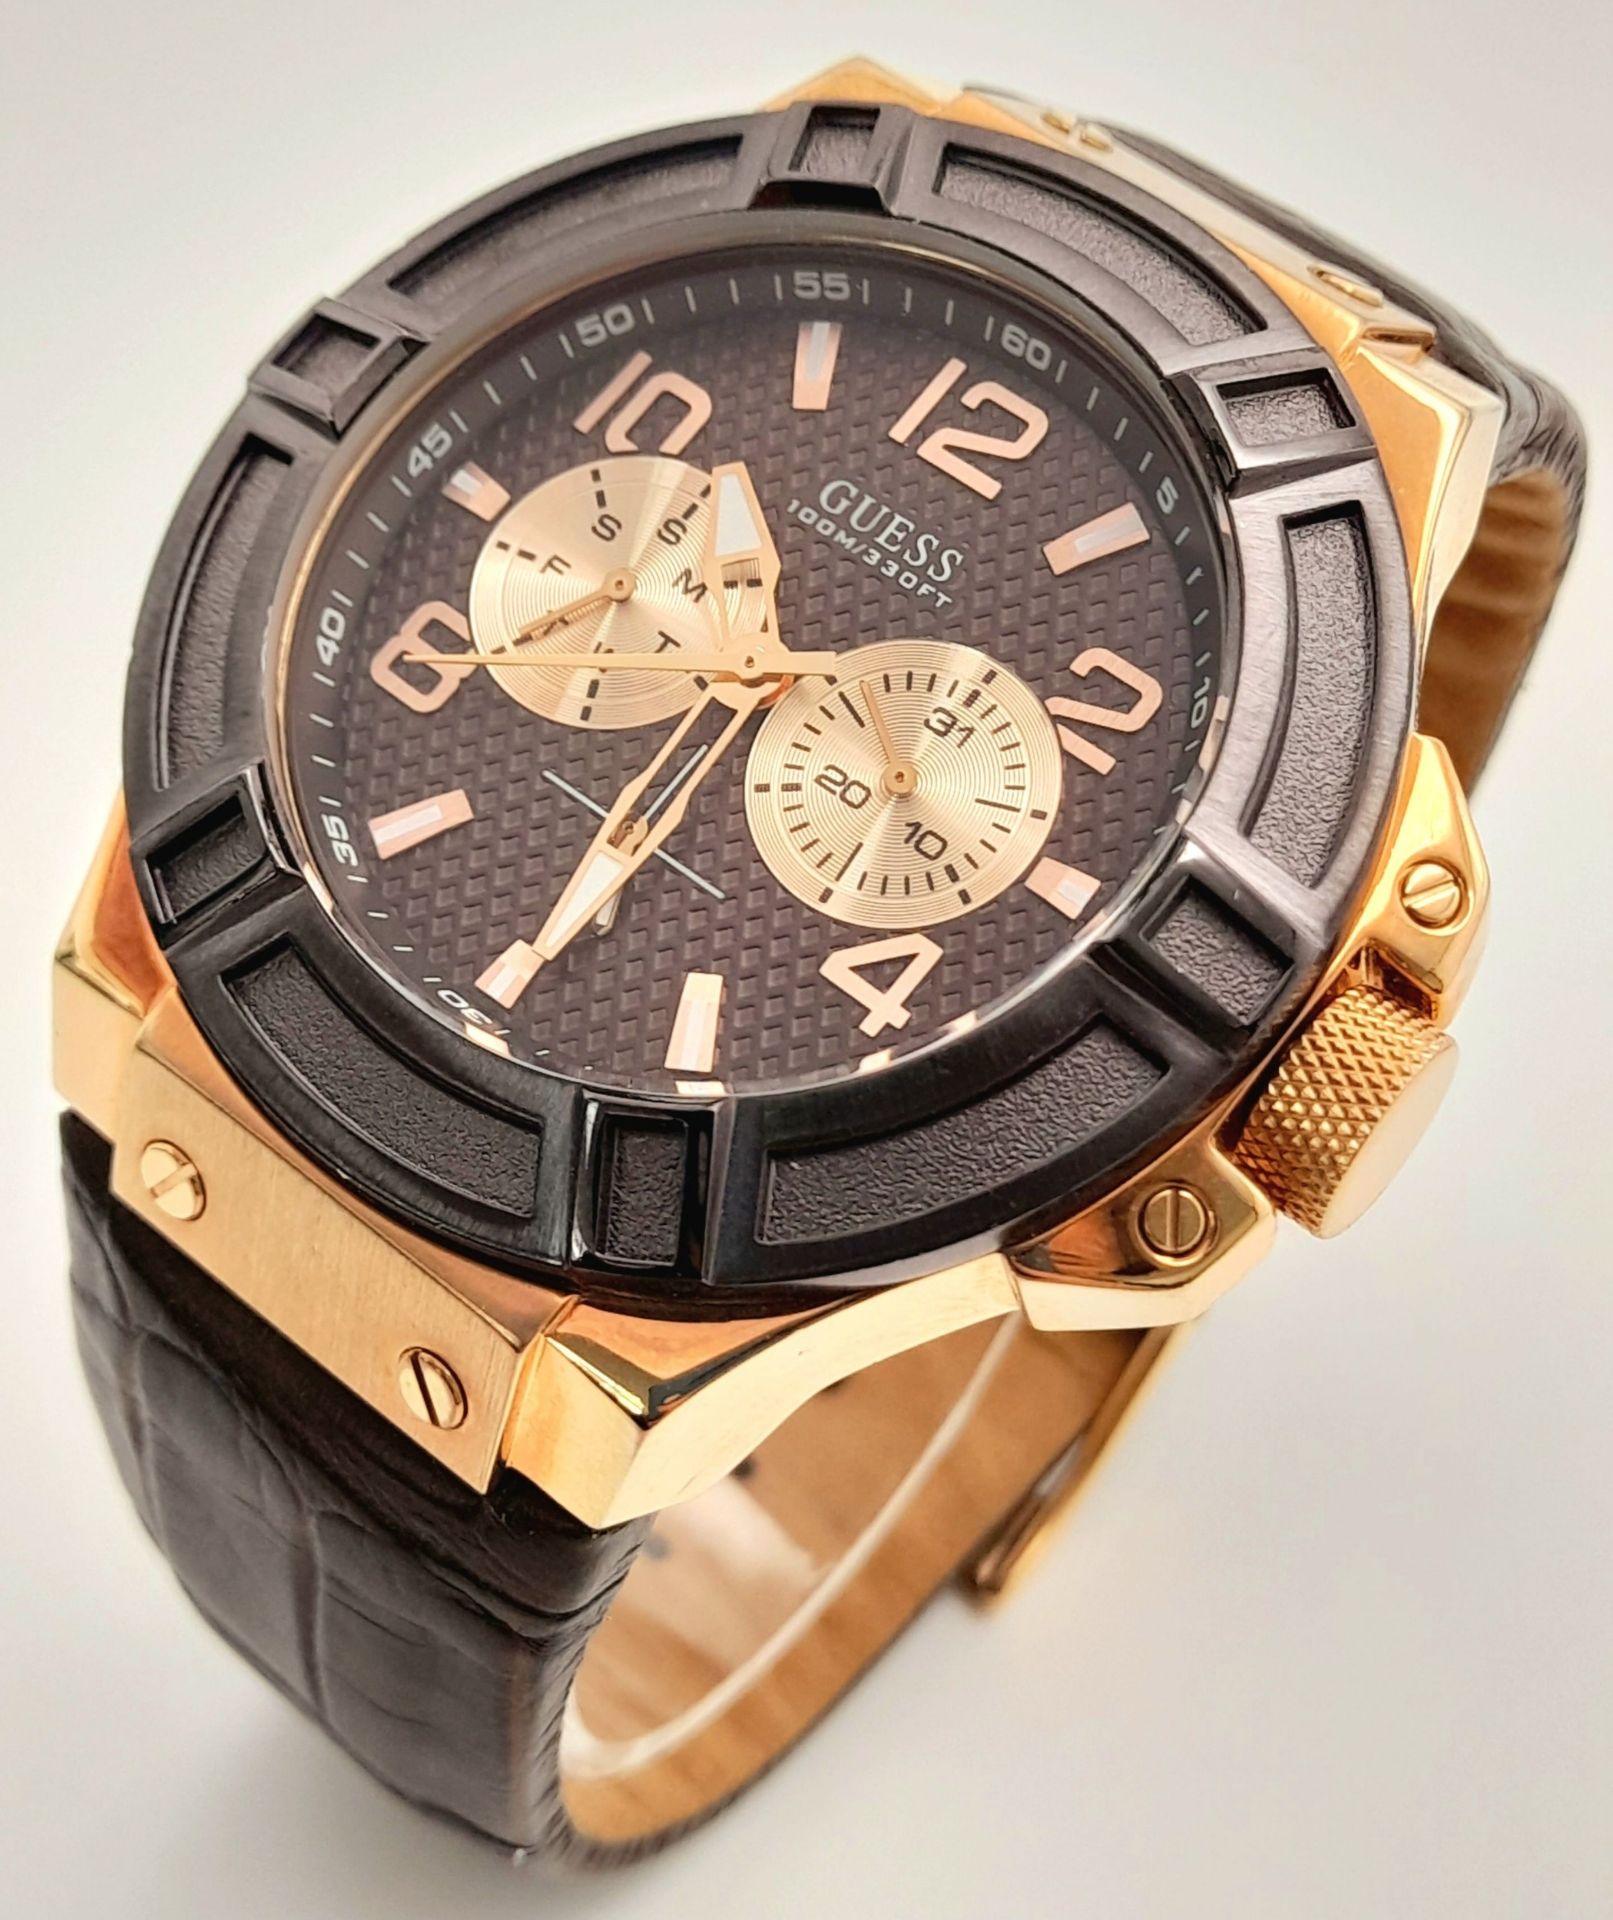 A Men’s Rose Gold-Toned Sports Fashion Watch by Guess (45mm Case). Full Working Order. - Bild 6 aus 6